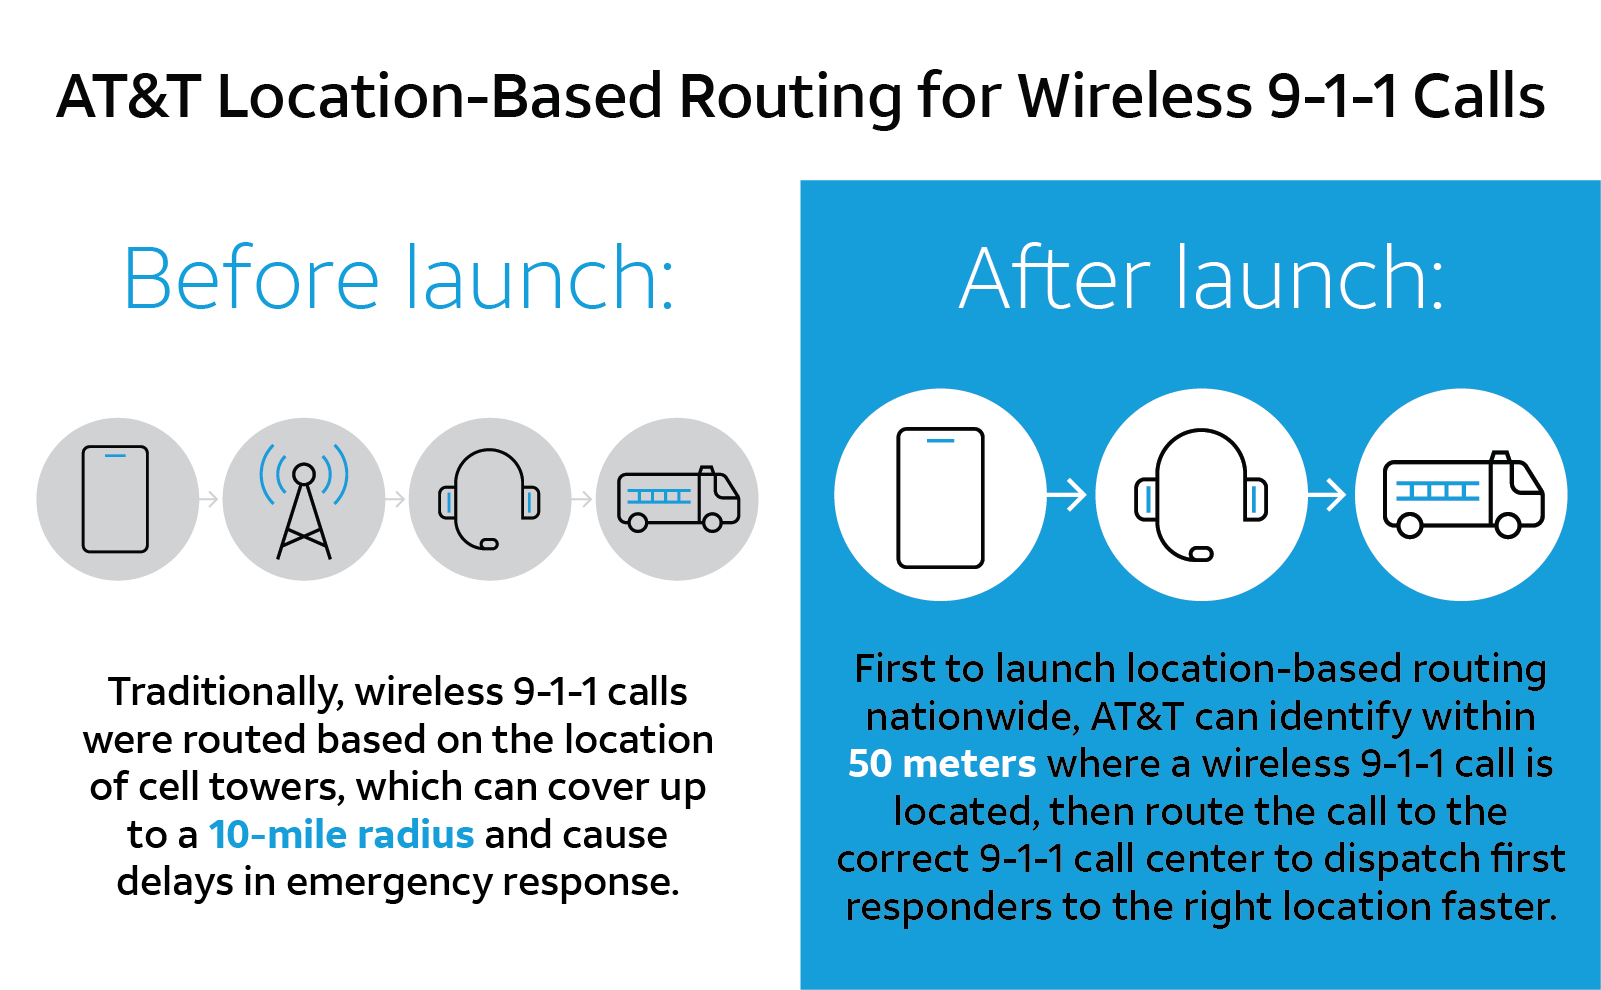 Location-Based Routing for Wireless 911 Calls